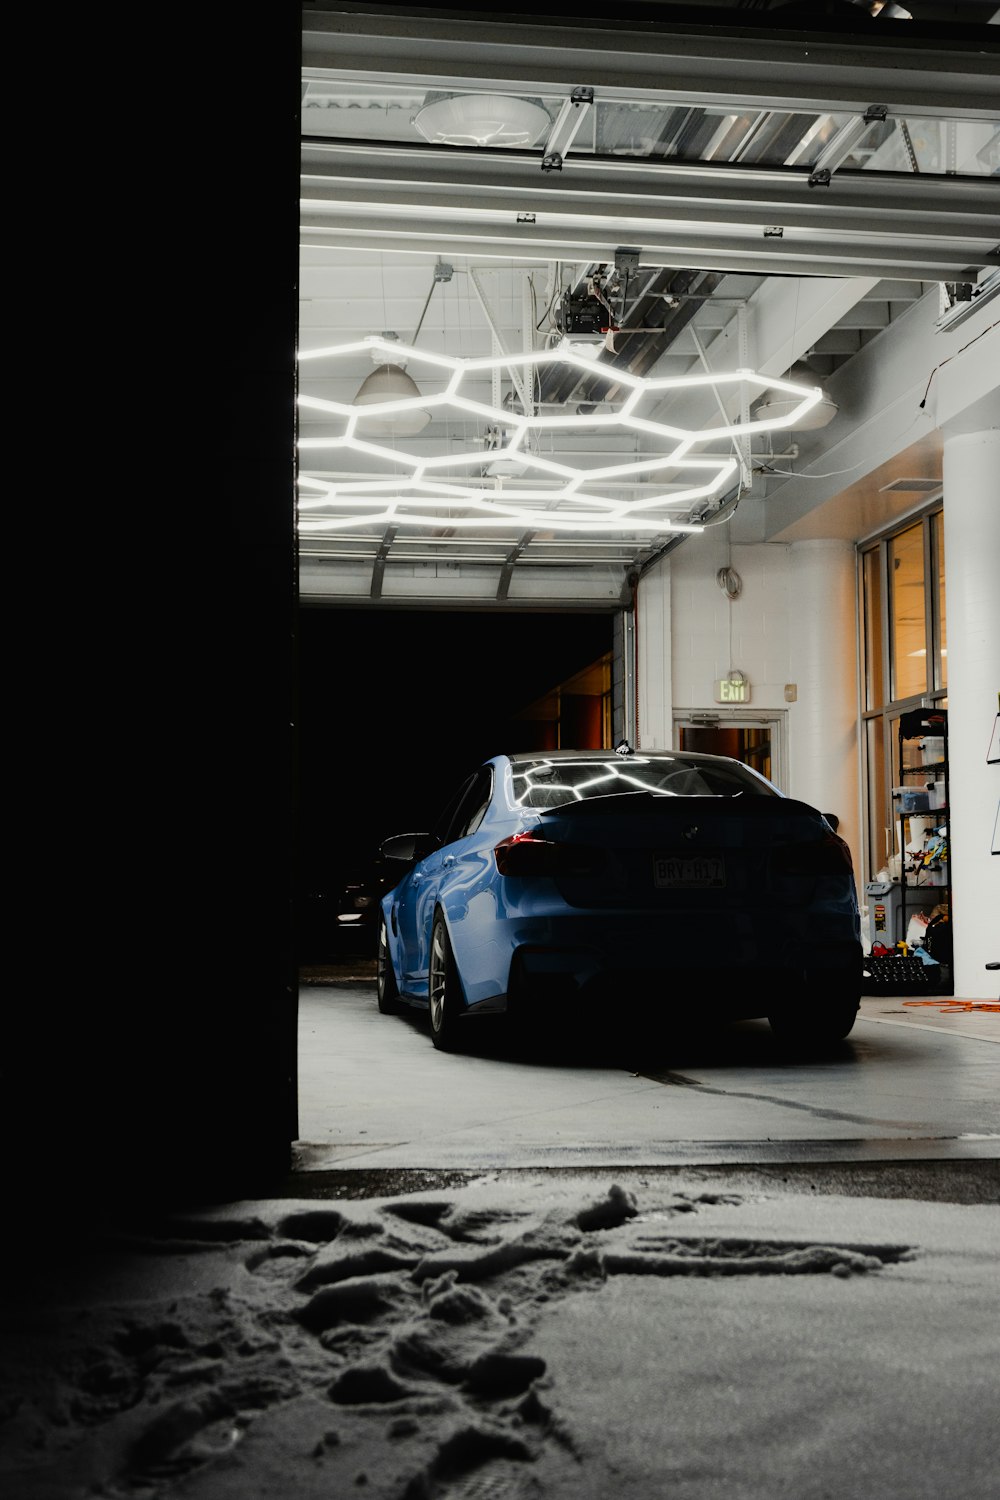 a blue sports car parked in a garage